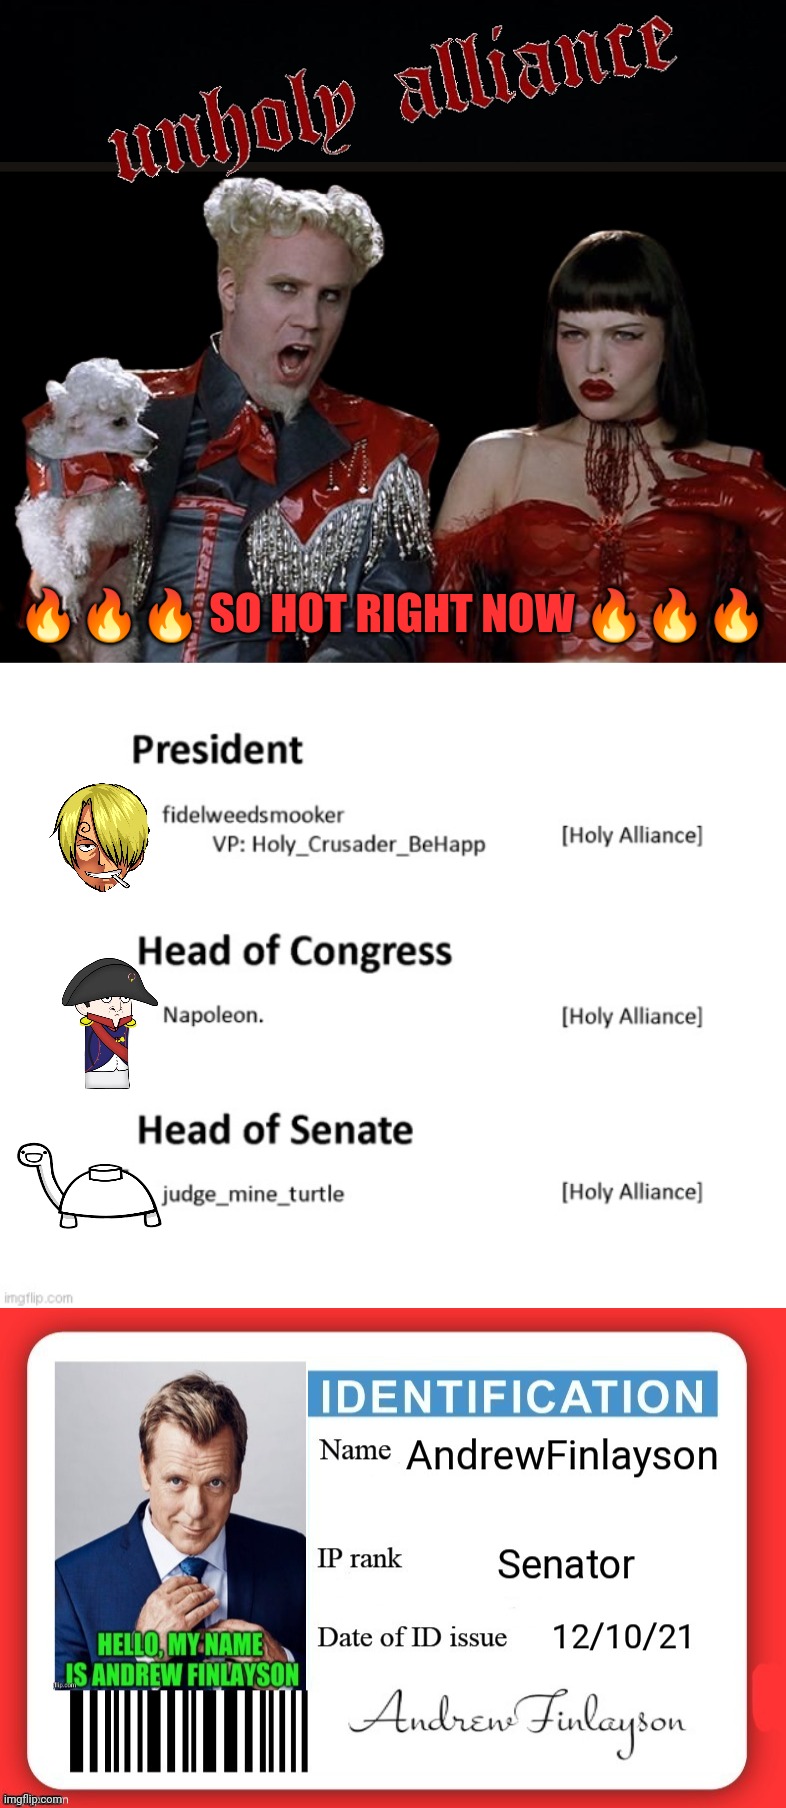 🔥🔥🔥 SO HOT RIGHT NOW 🔥🔥🔥 | image tagged in so hot rn | made w/ Imgflip meme maker